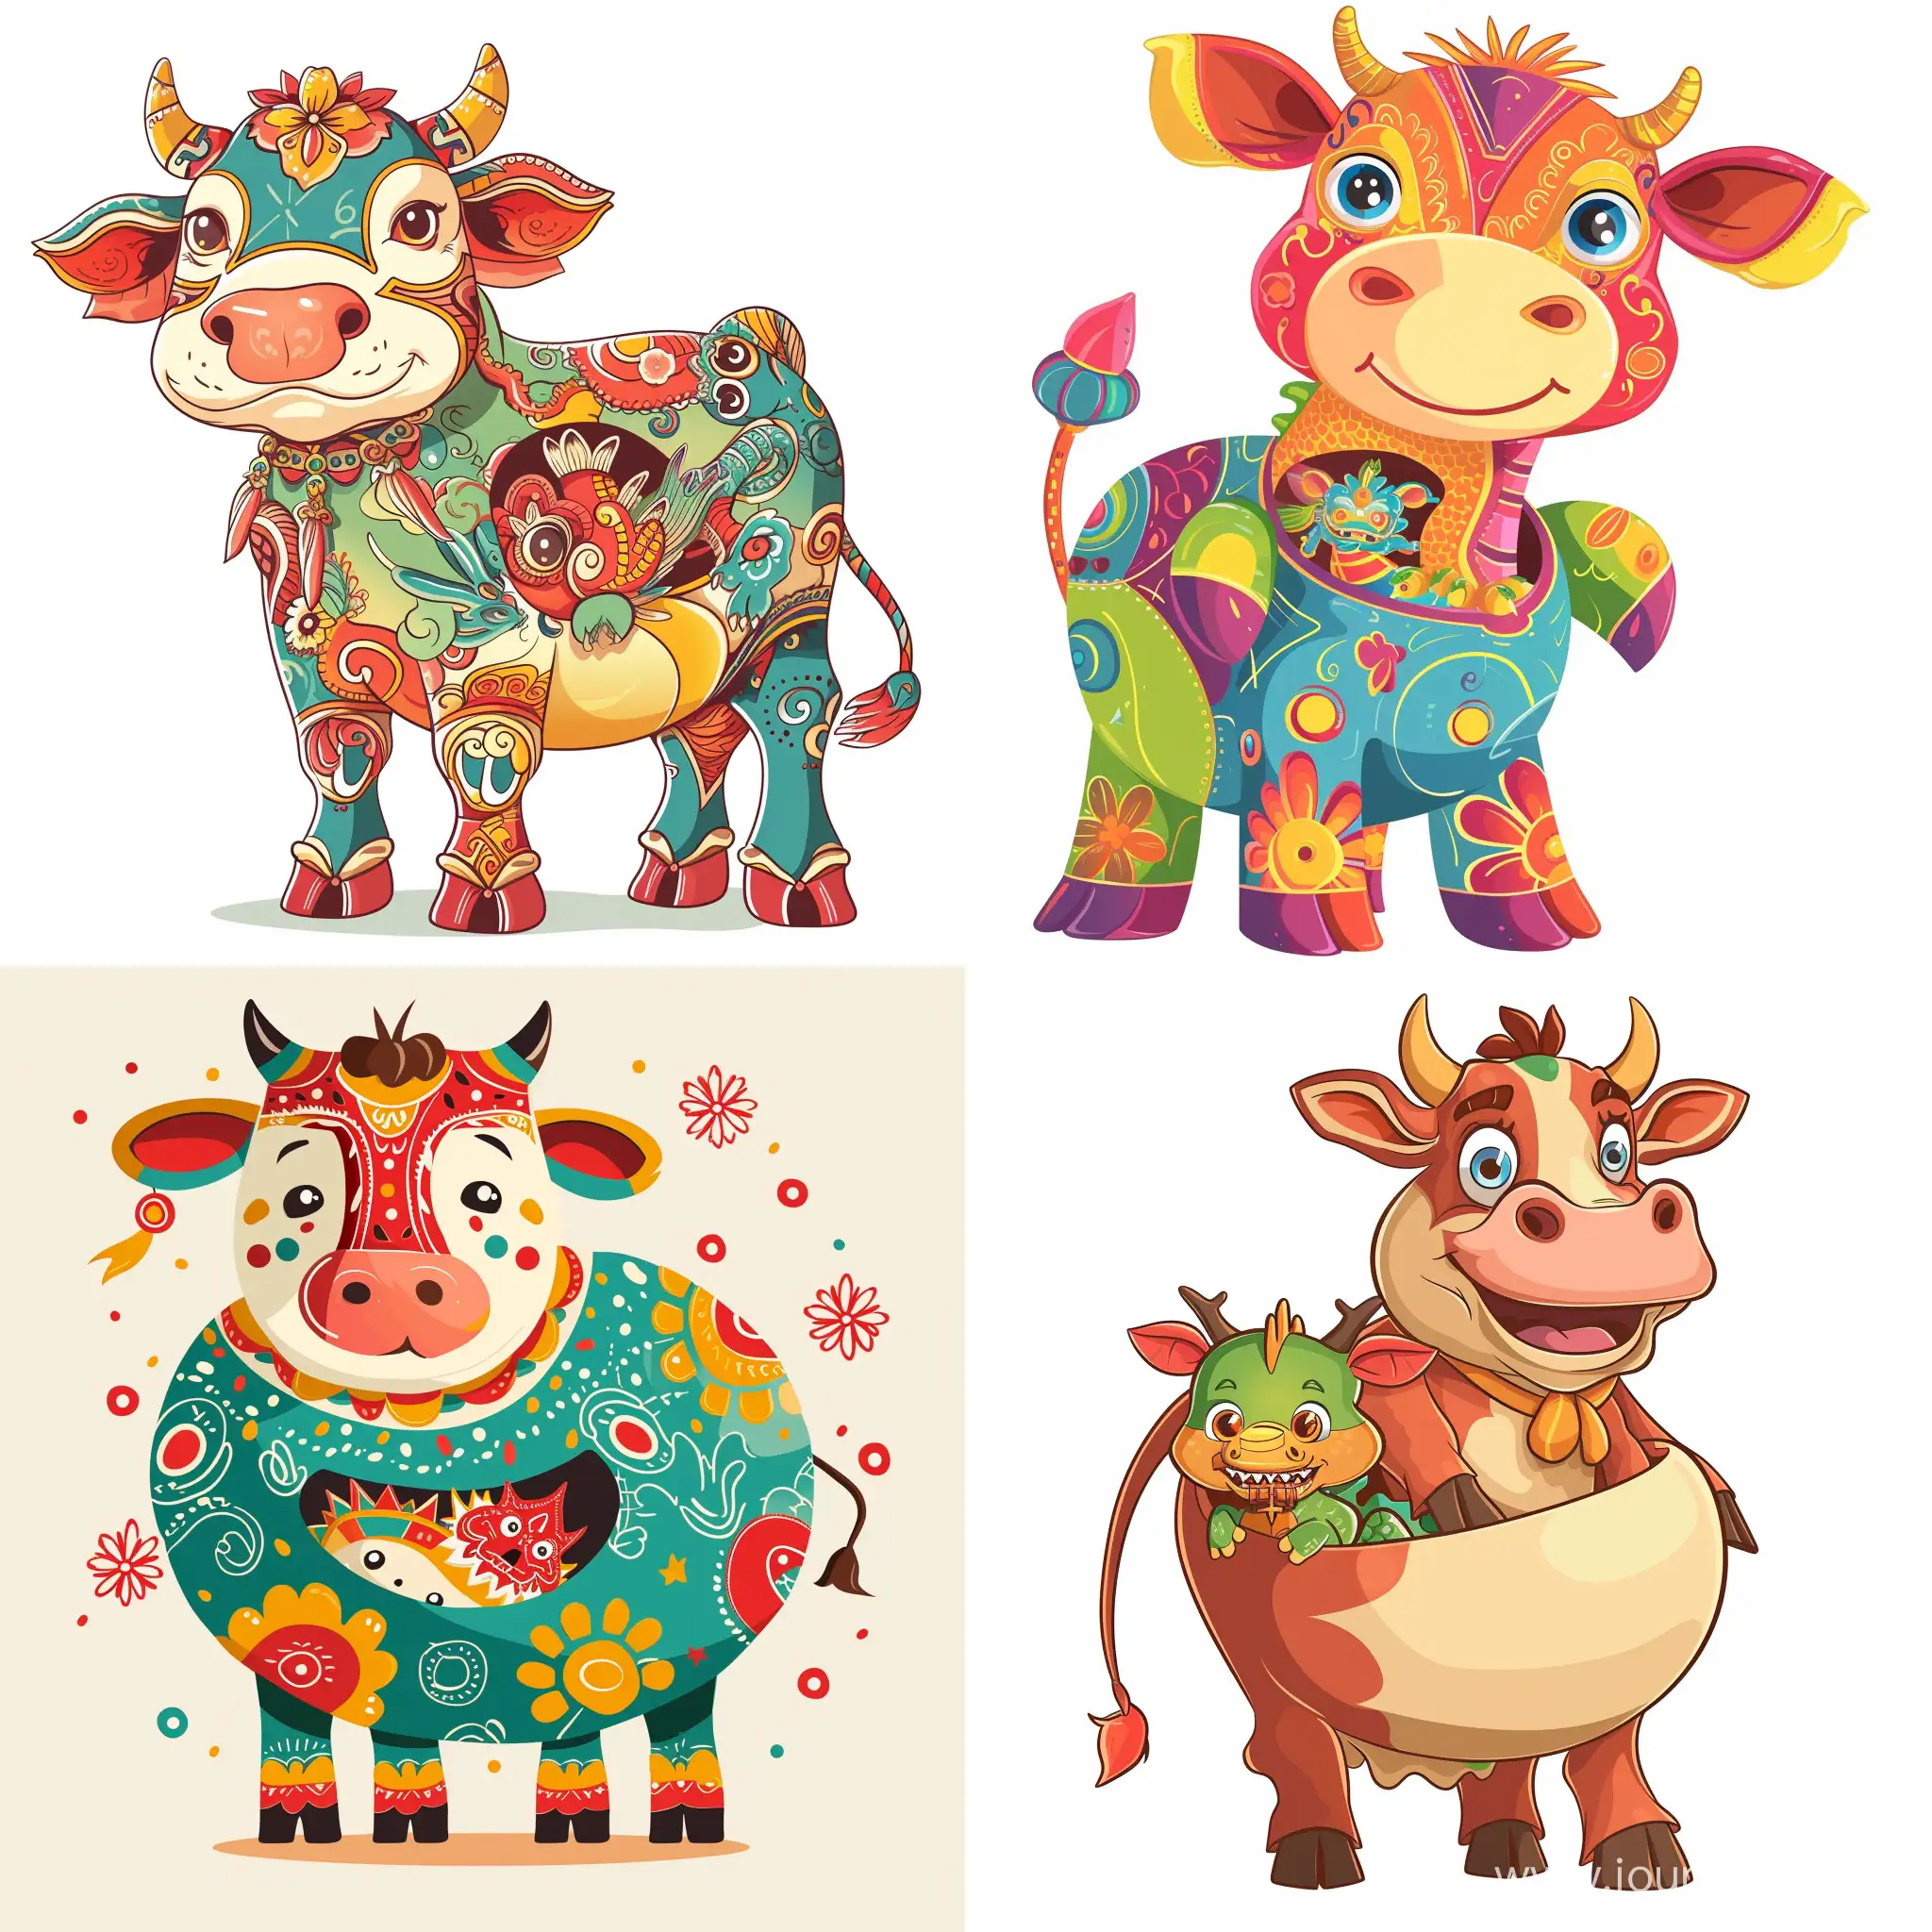 This is an adorable cow in a cute cartoon style, with bright colors. The cow is expecting a baby Chinese dragon, and the Chinese dragon baby is inside the cow's belly.